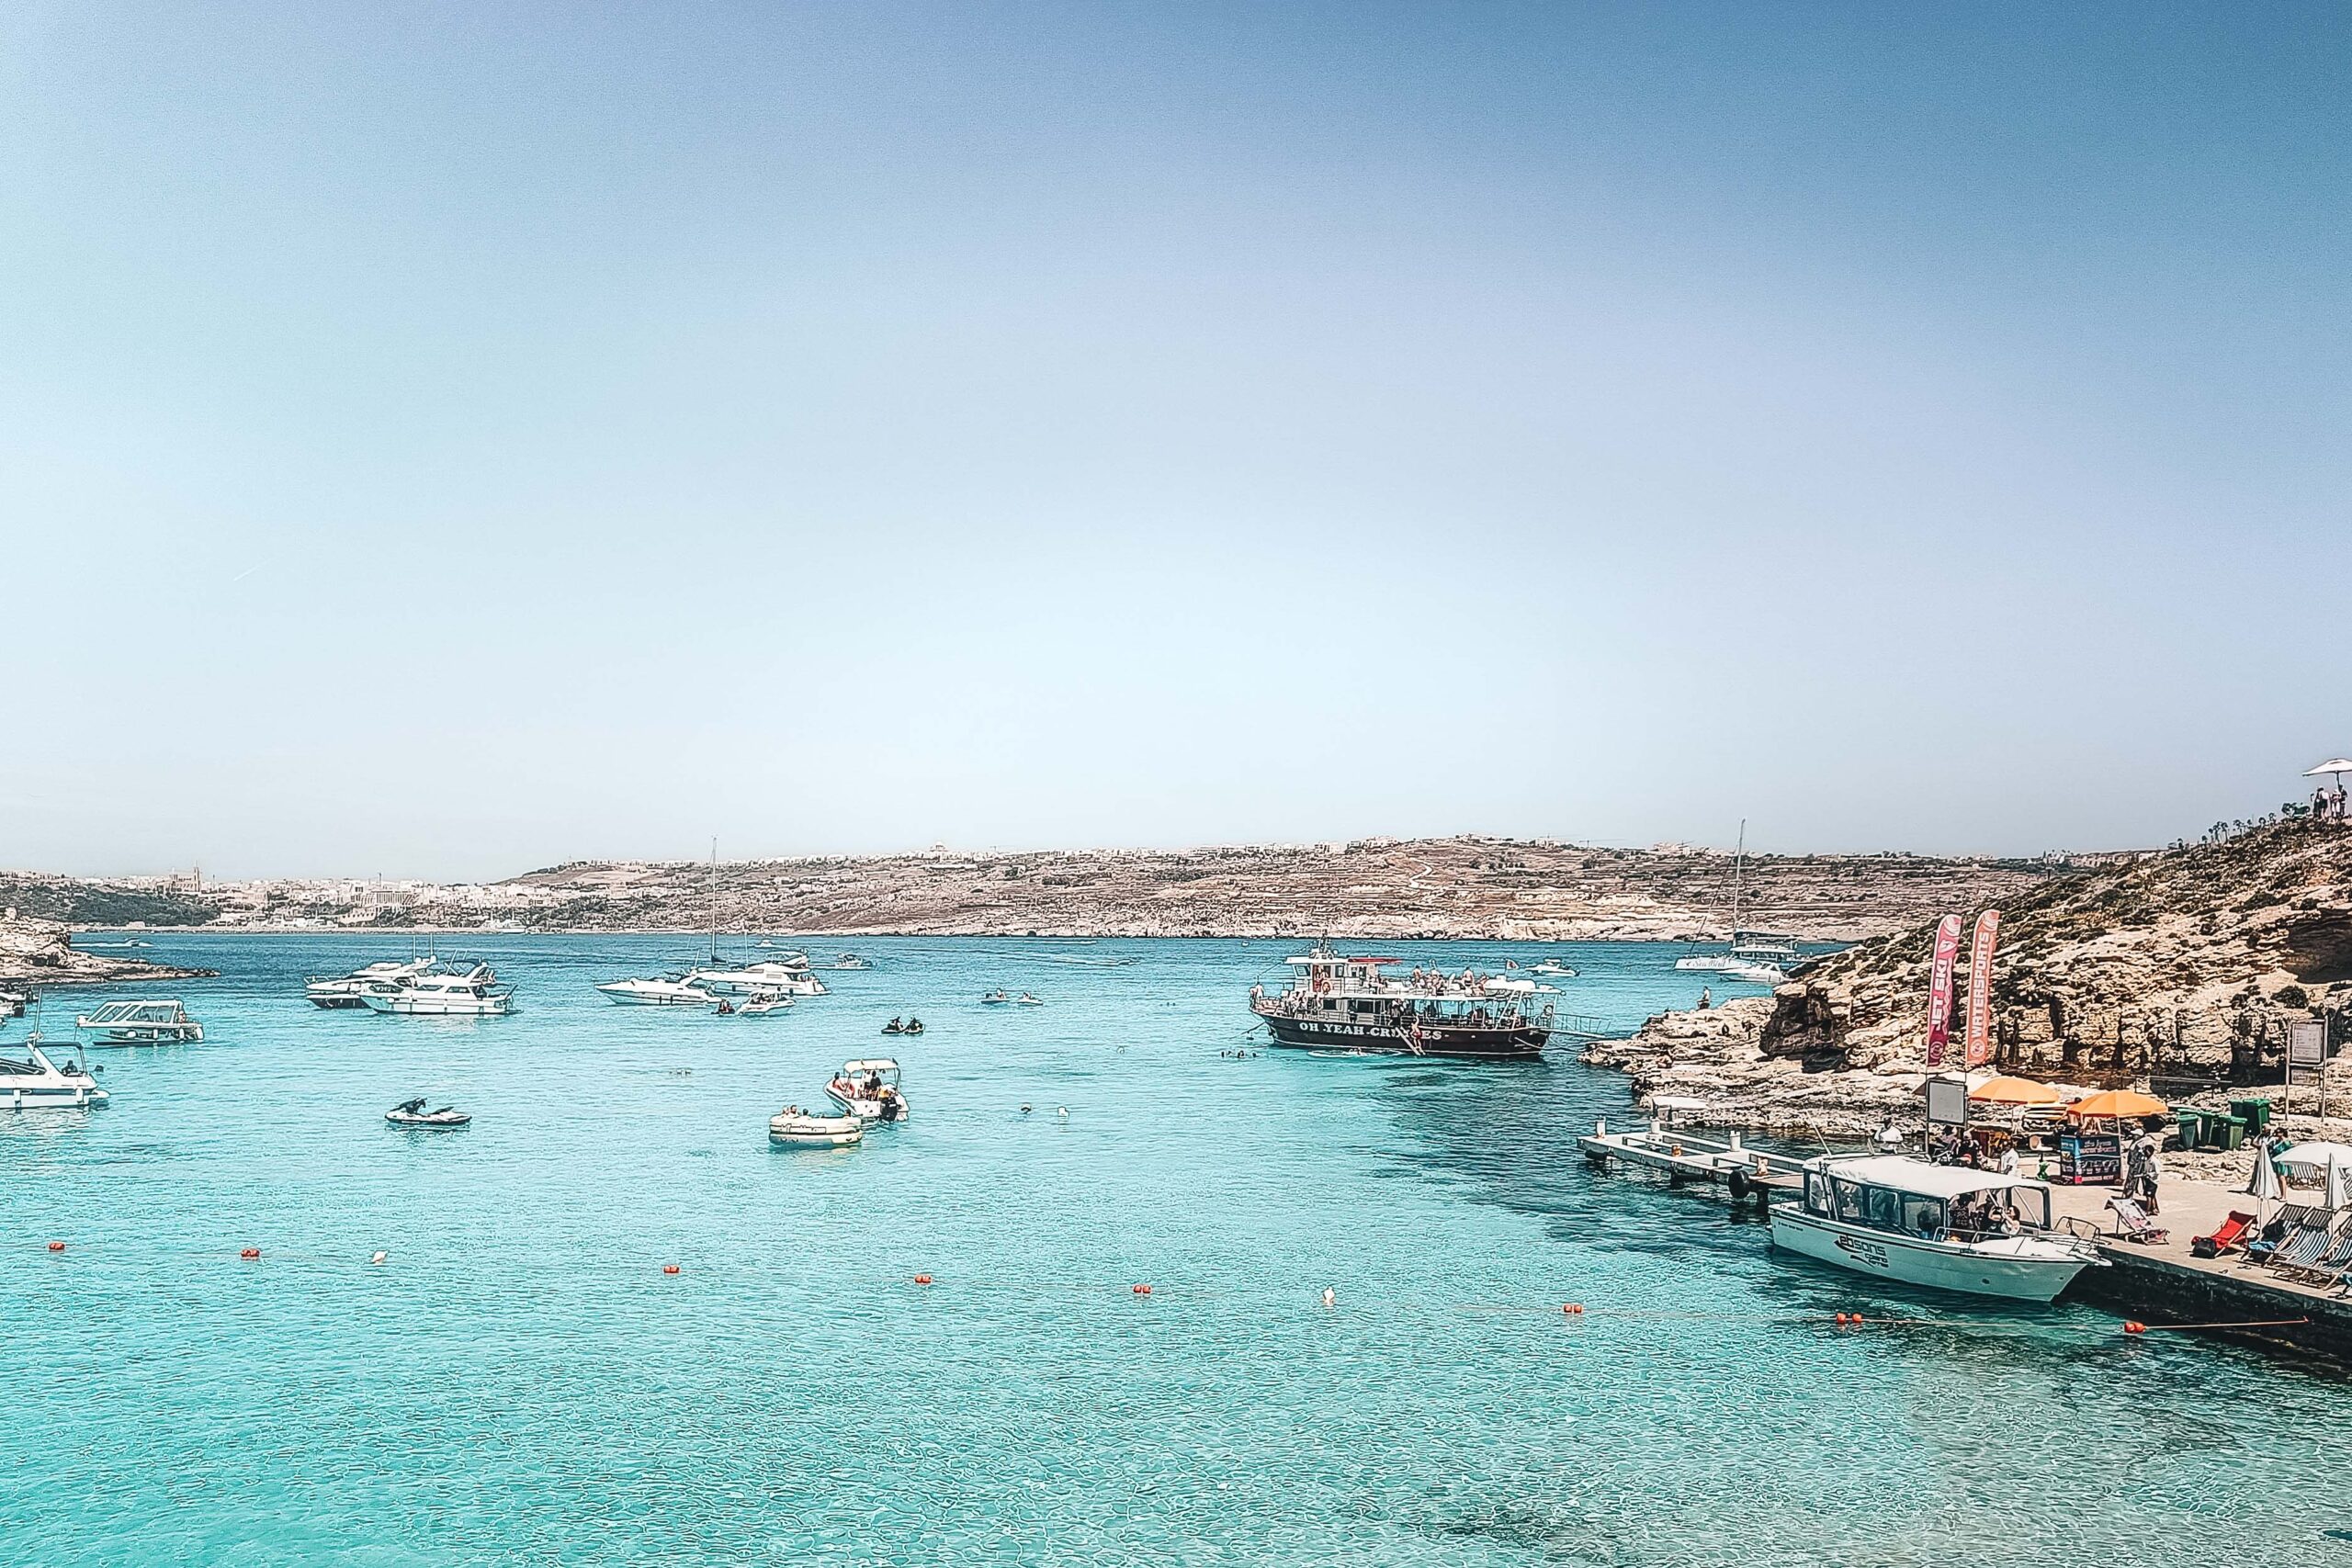 Boats and swimmers at the Blue Lagoon in Comino island, Malta on a sunny day